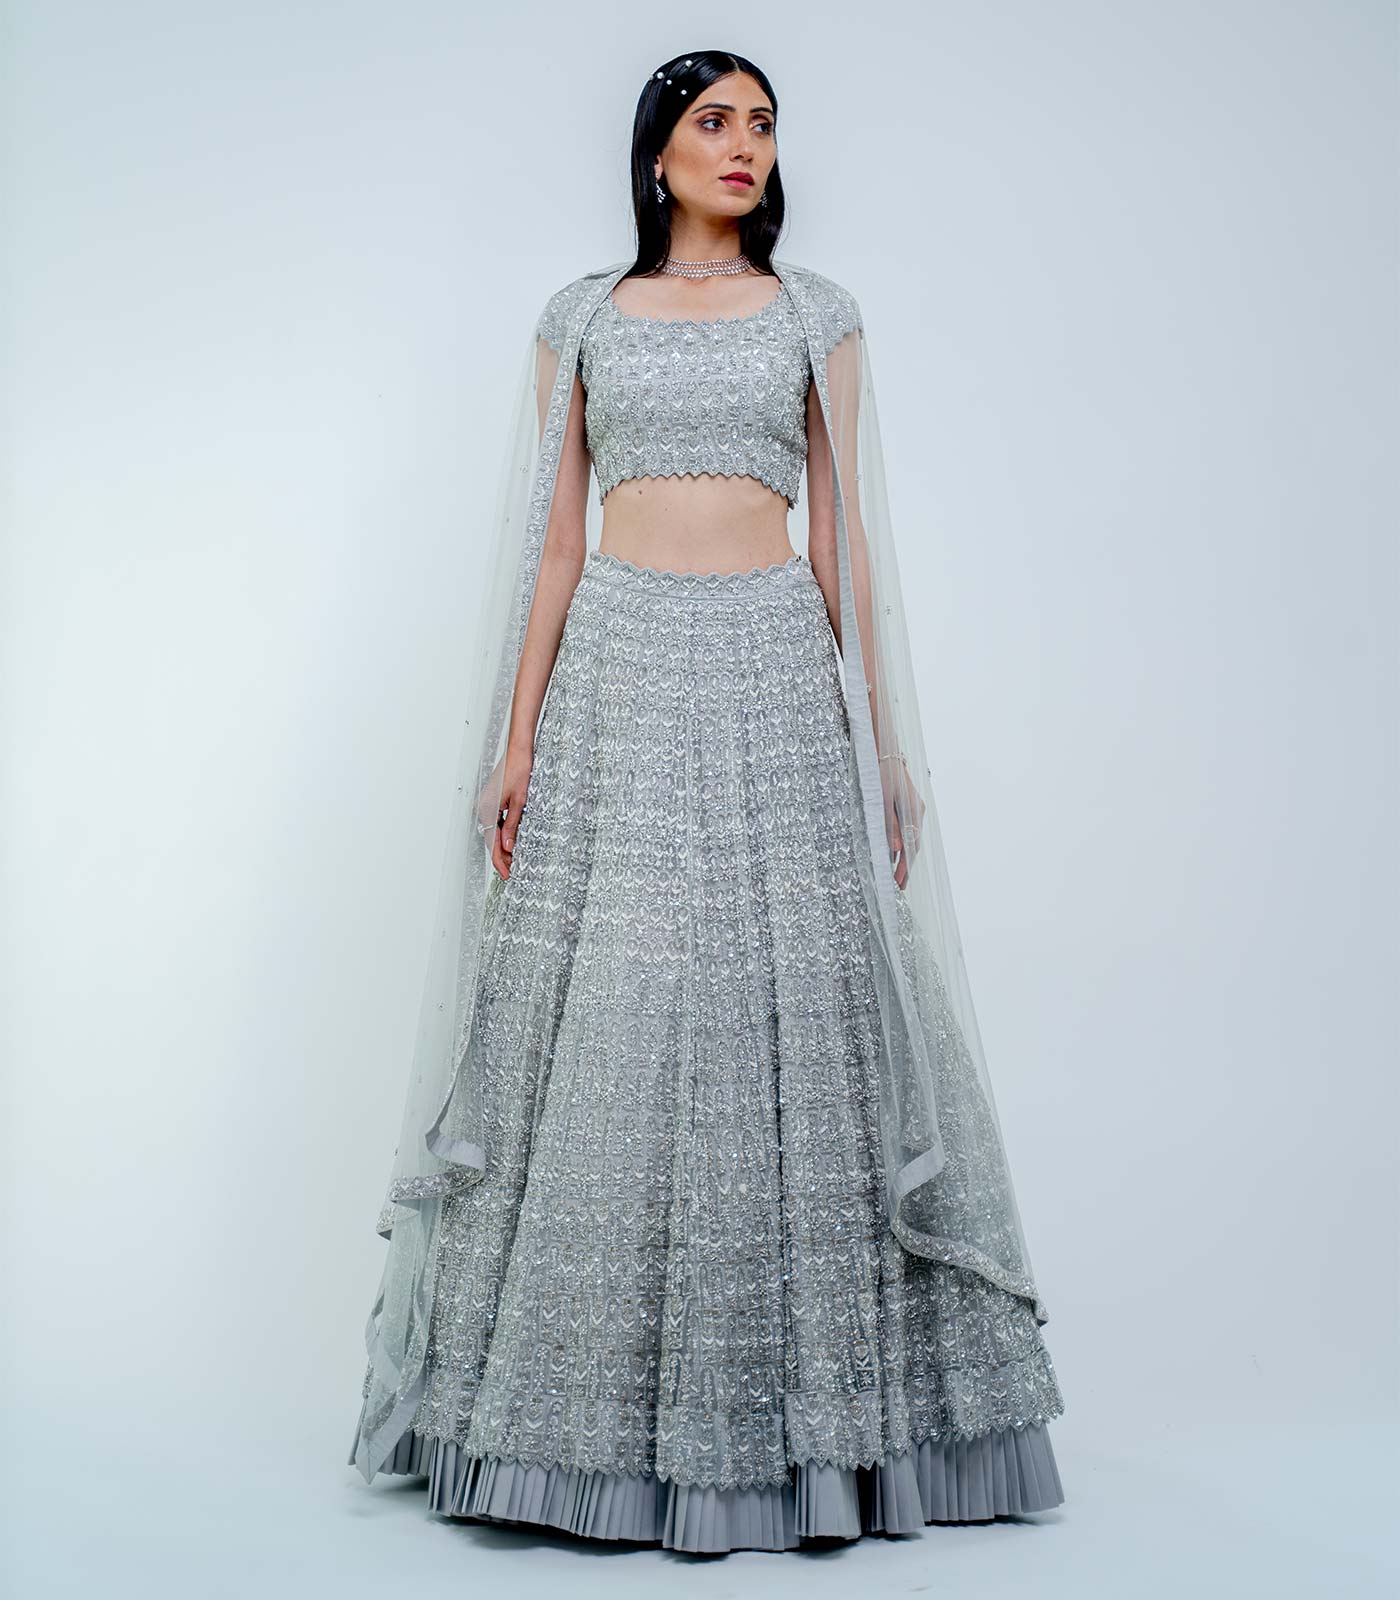 Indian Silver Ready-made With Sleeve Heavy Mirror and Stone Beaded Work  Blouse Saree Lehenga Designer Choli,crop Top Fully Stitched Padded - Etsy